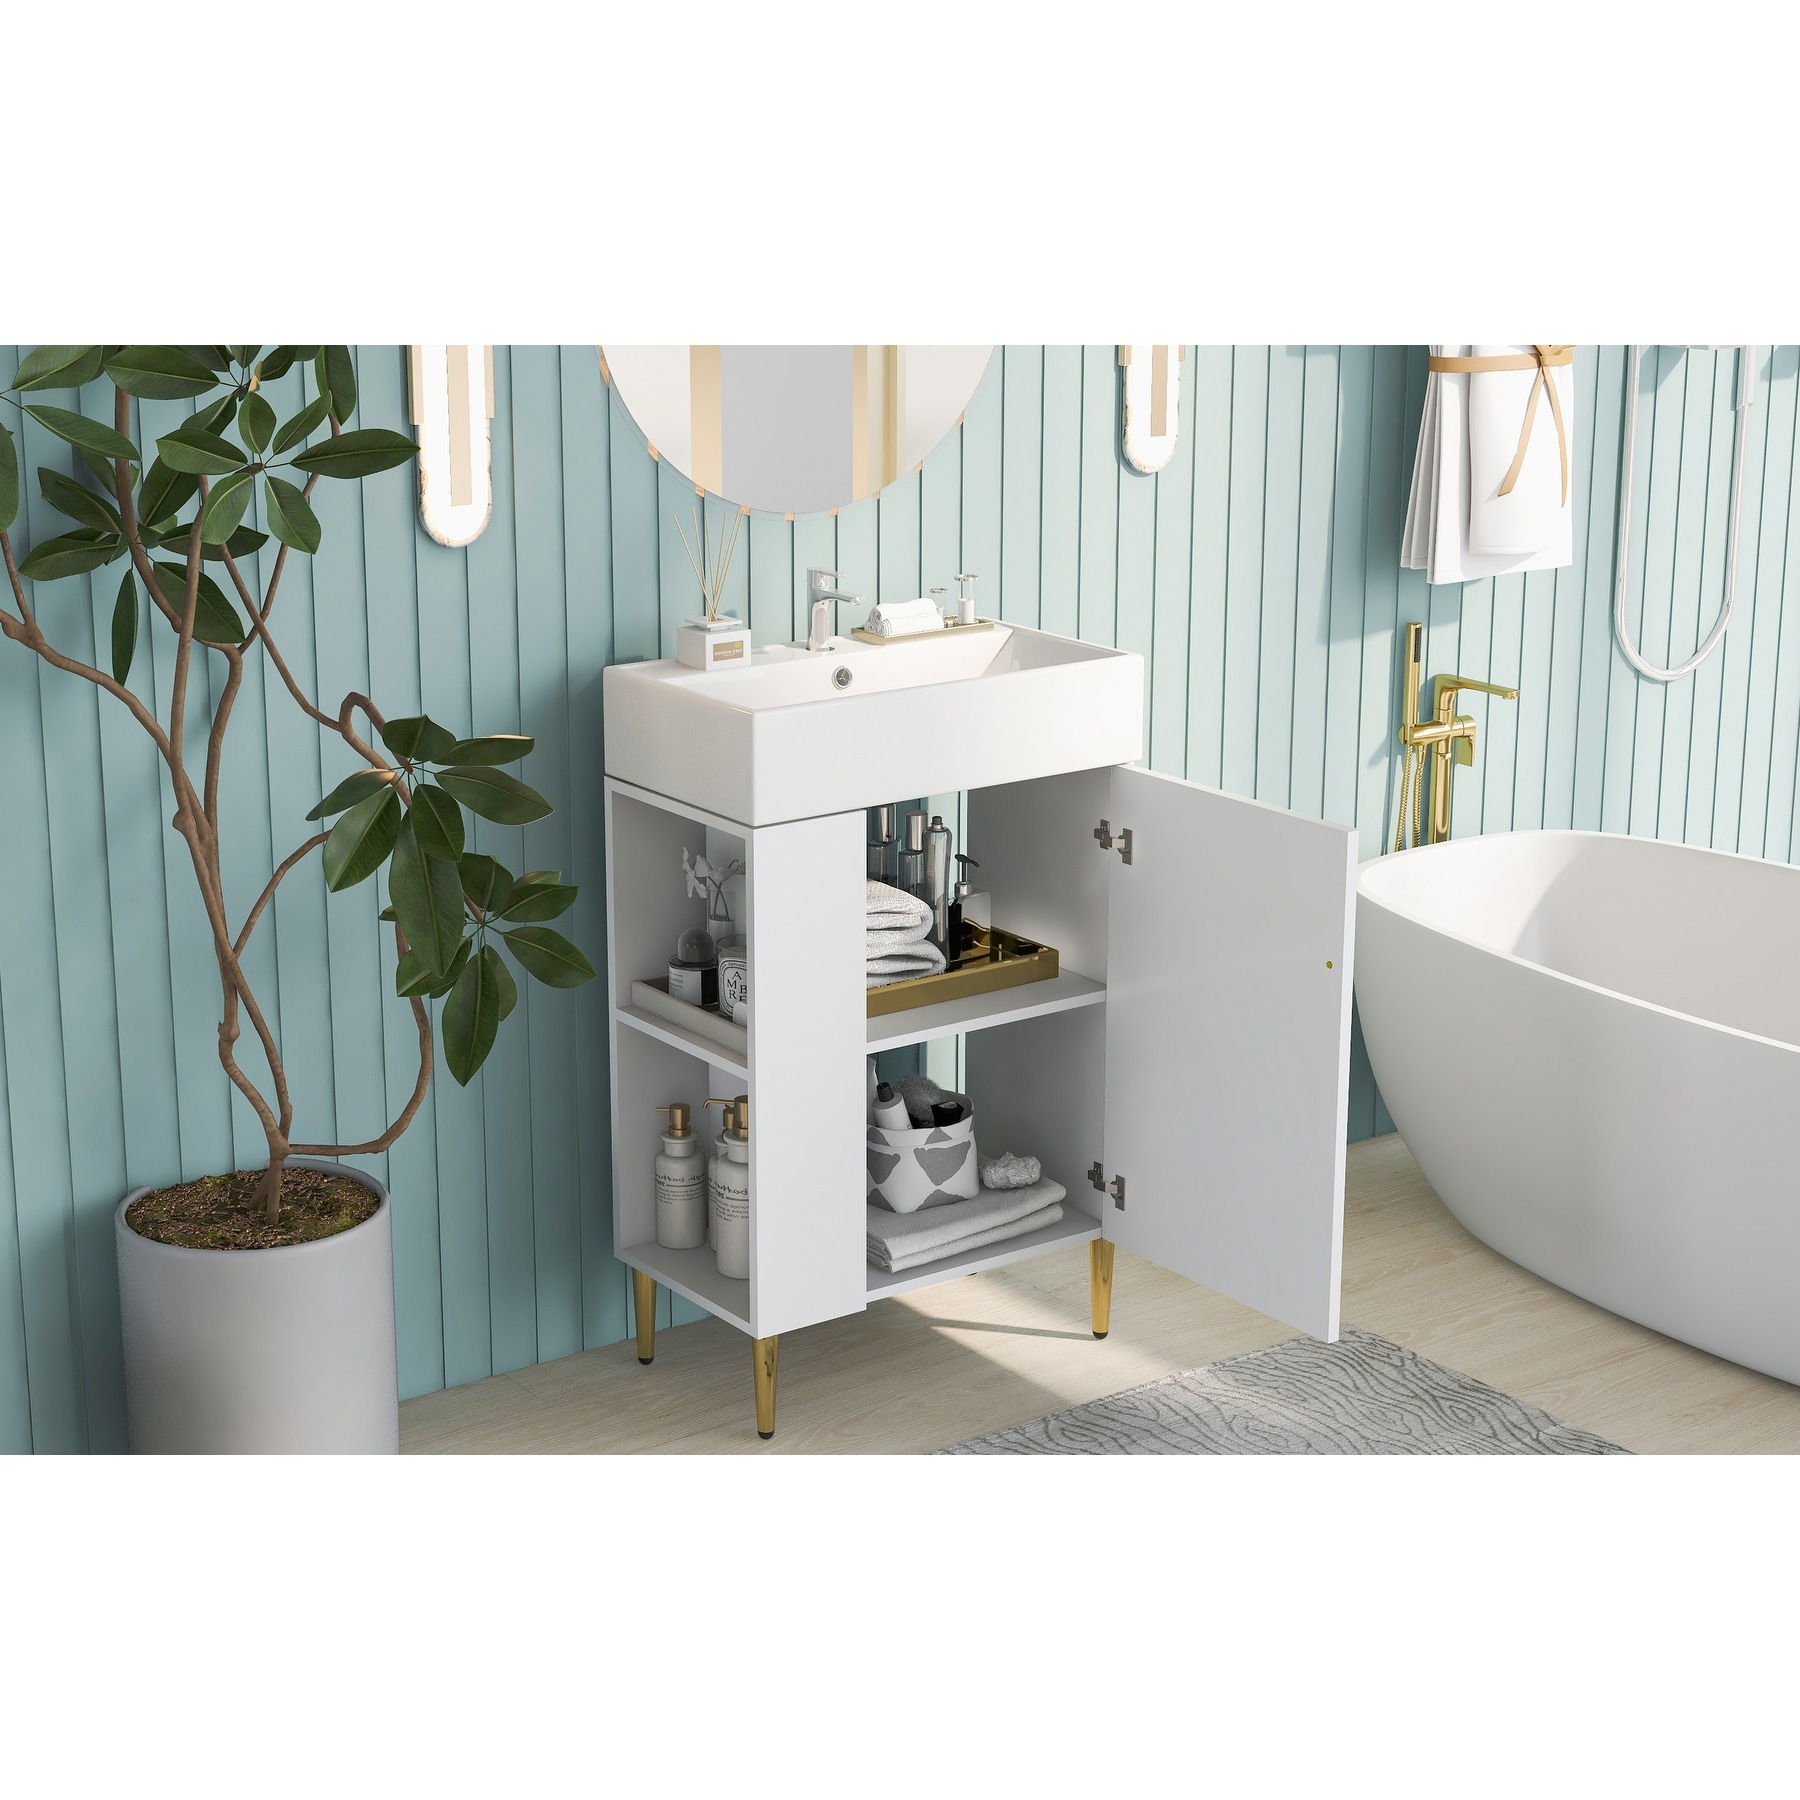 https://ak1.ostkcdn.com/images/products/is/images/direct/dc3dfcf3e5fa92a9b53a54afbf6dfeaadd638109/21.6in-Bathroom-Vanity-Left-Side-Storage-Cabinet-w-Ceramic-Vessel-Sink.jpg